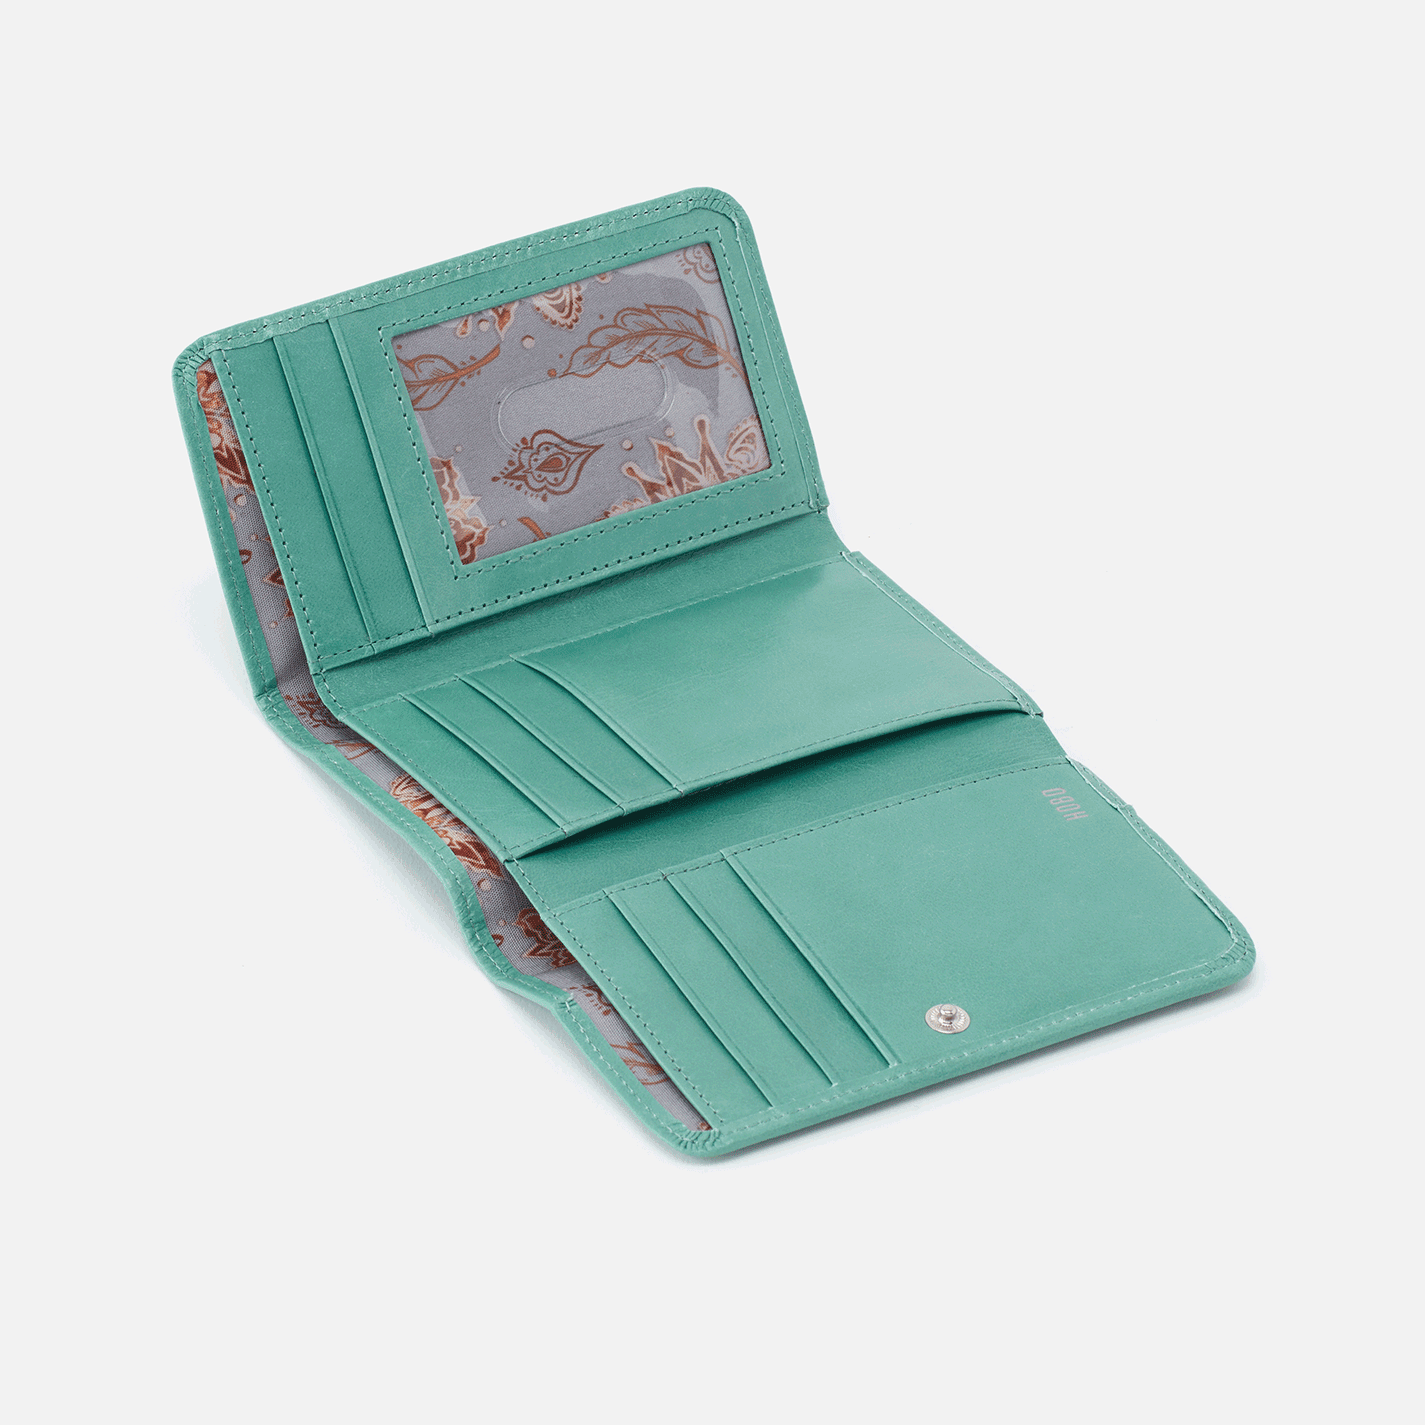 HOBO Jill Wallet - King Frog Clothing & The LilyPad Boutique